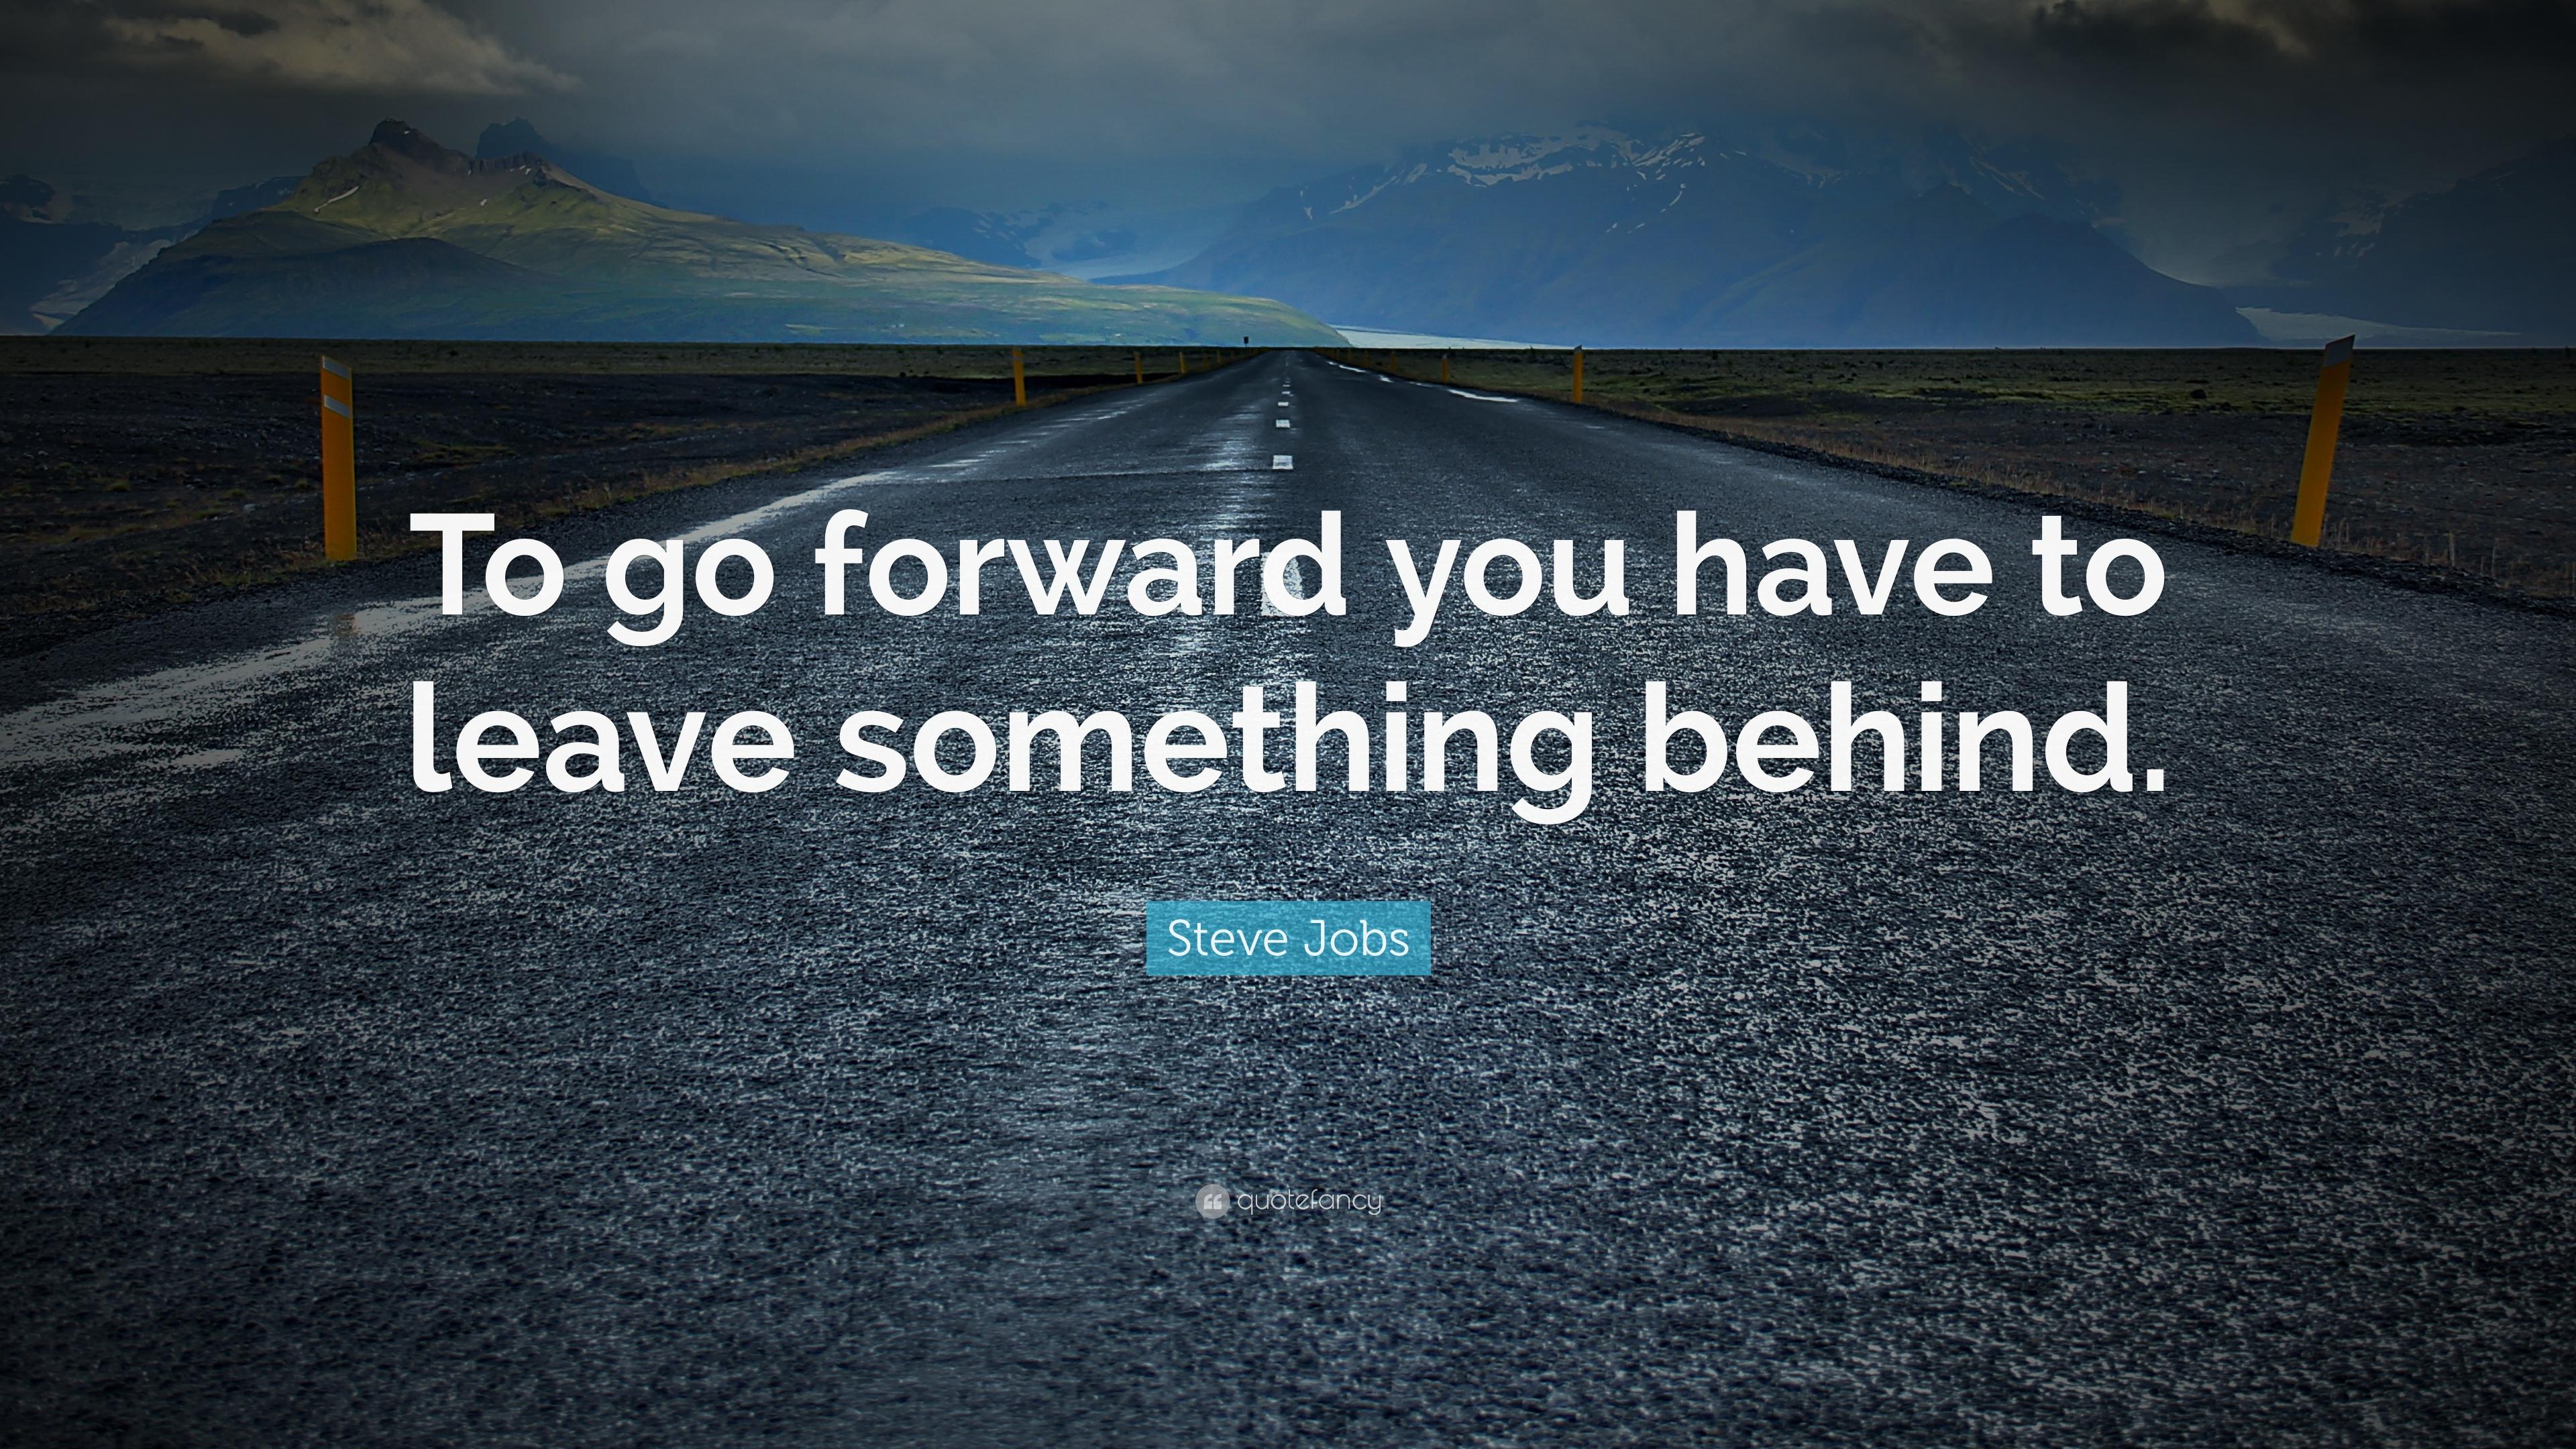 Steve Jobs Quote: “To go forward you have to leave something behind